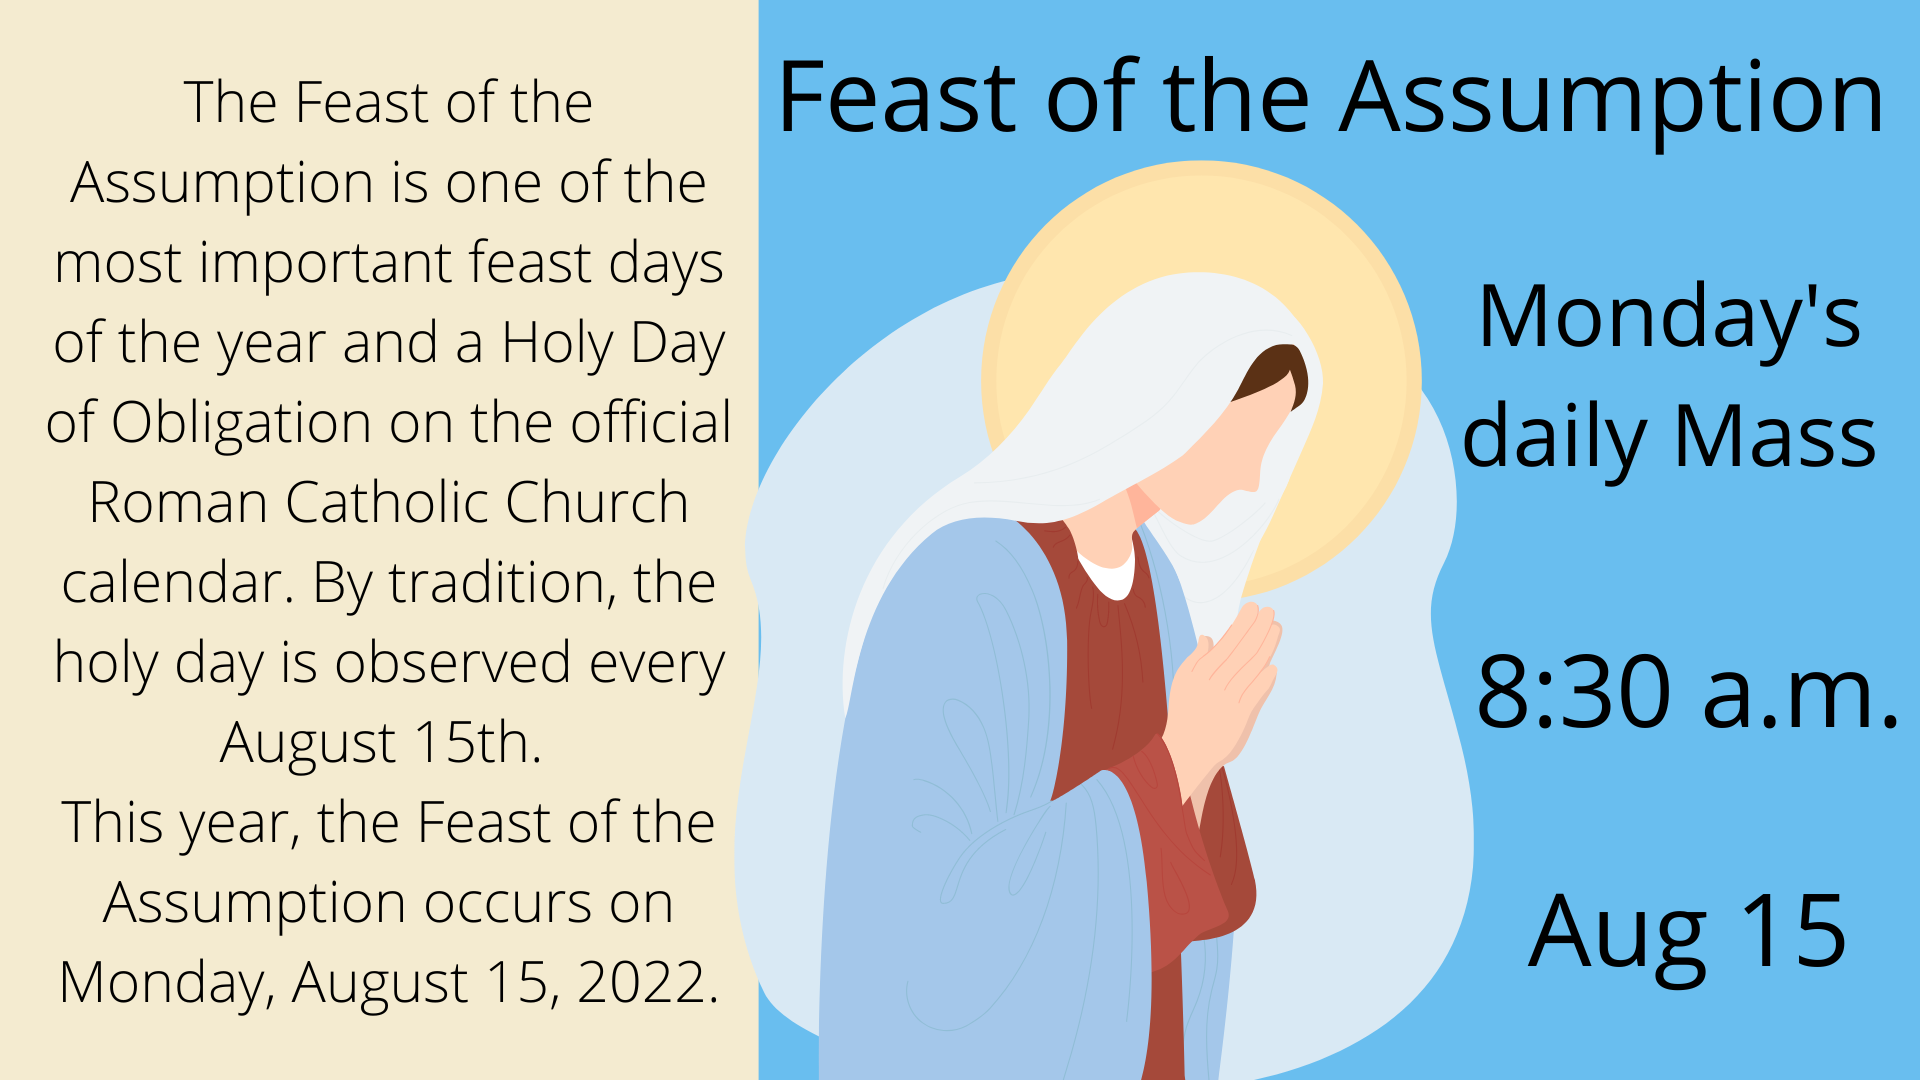 The Feast of the Assumption